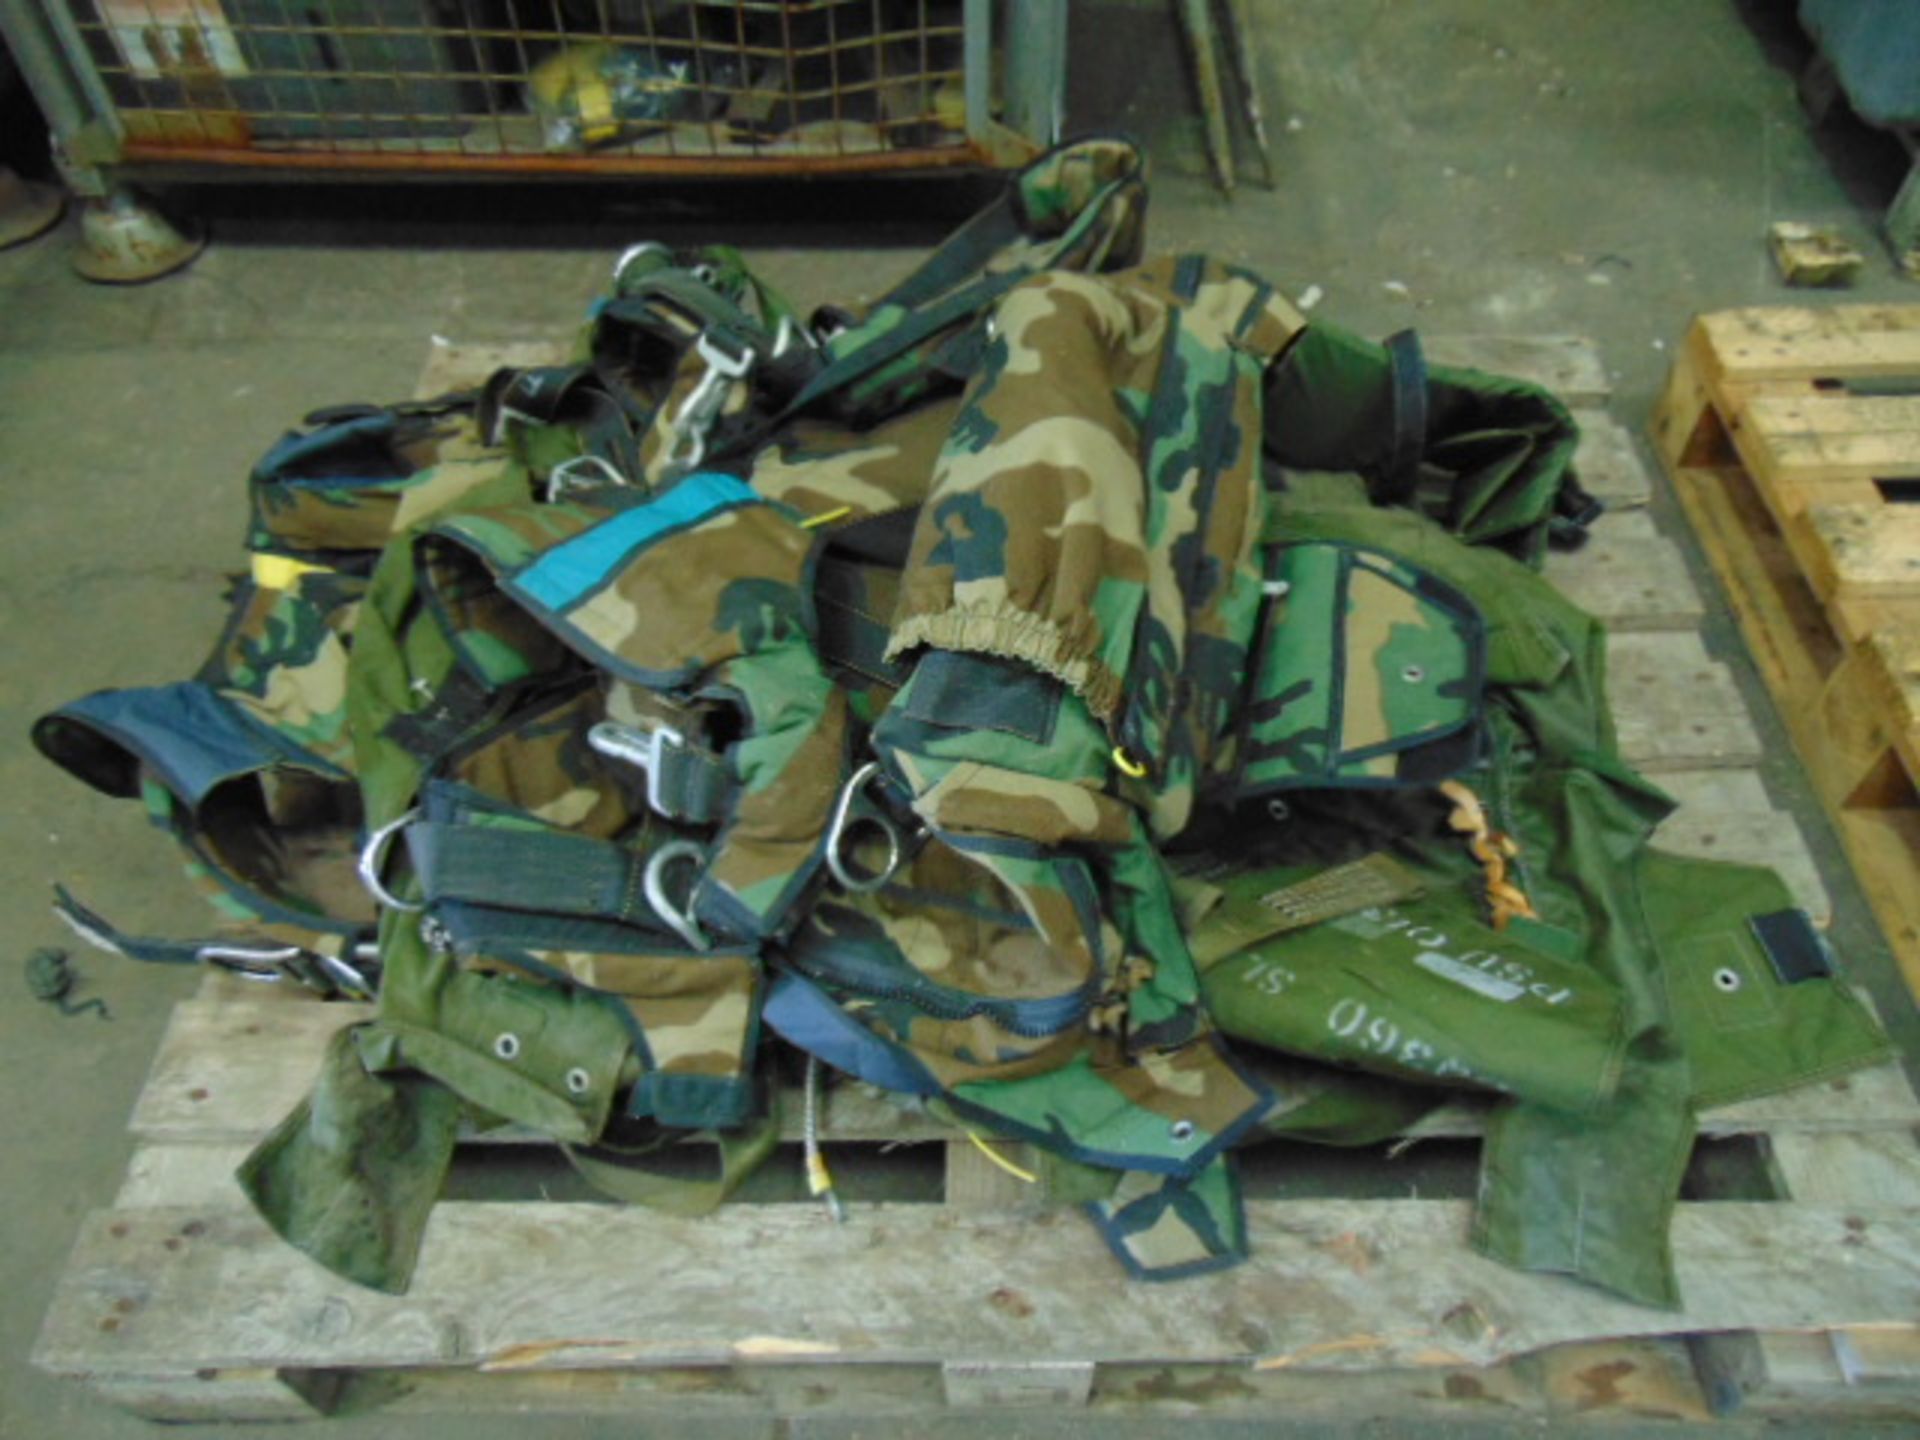 1 x Pallet of Parachute Packs as shown